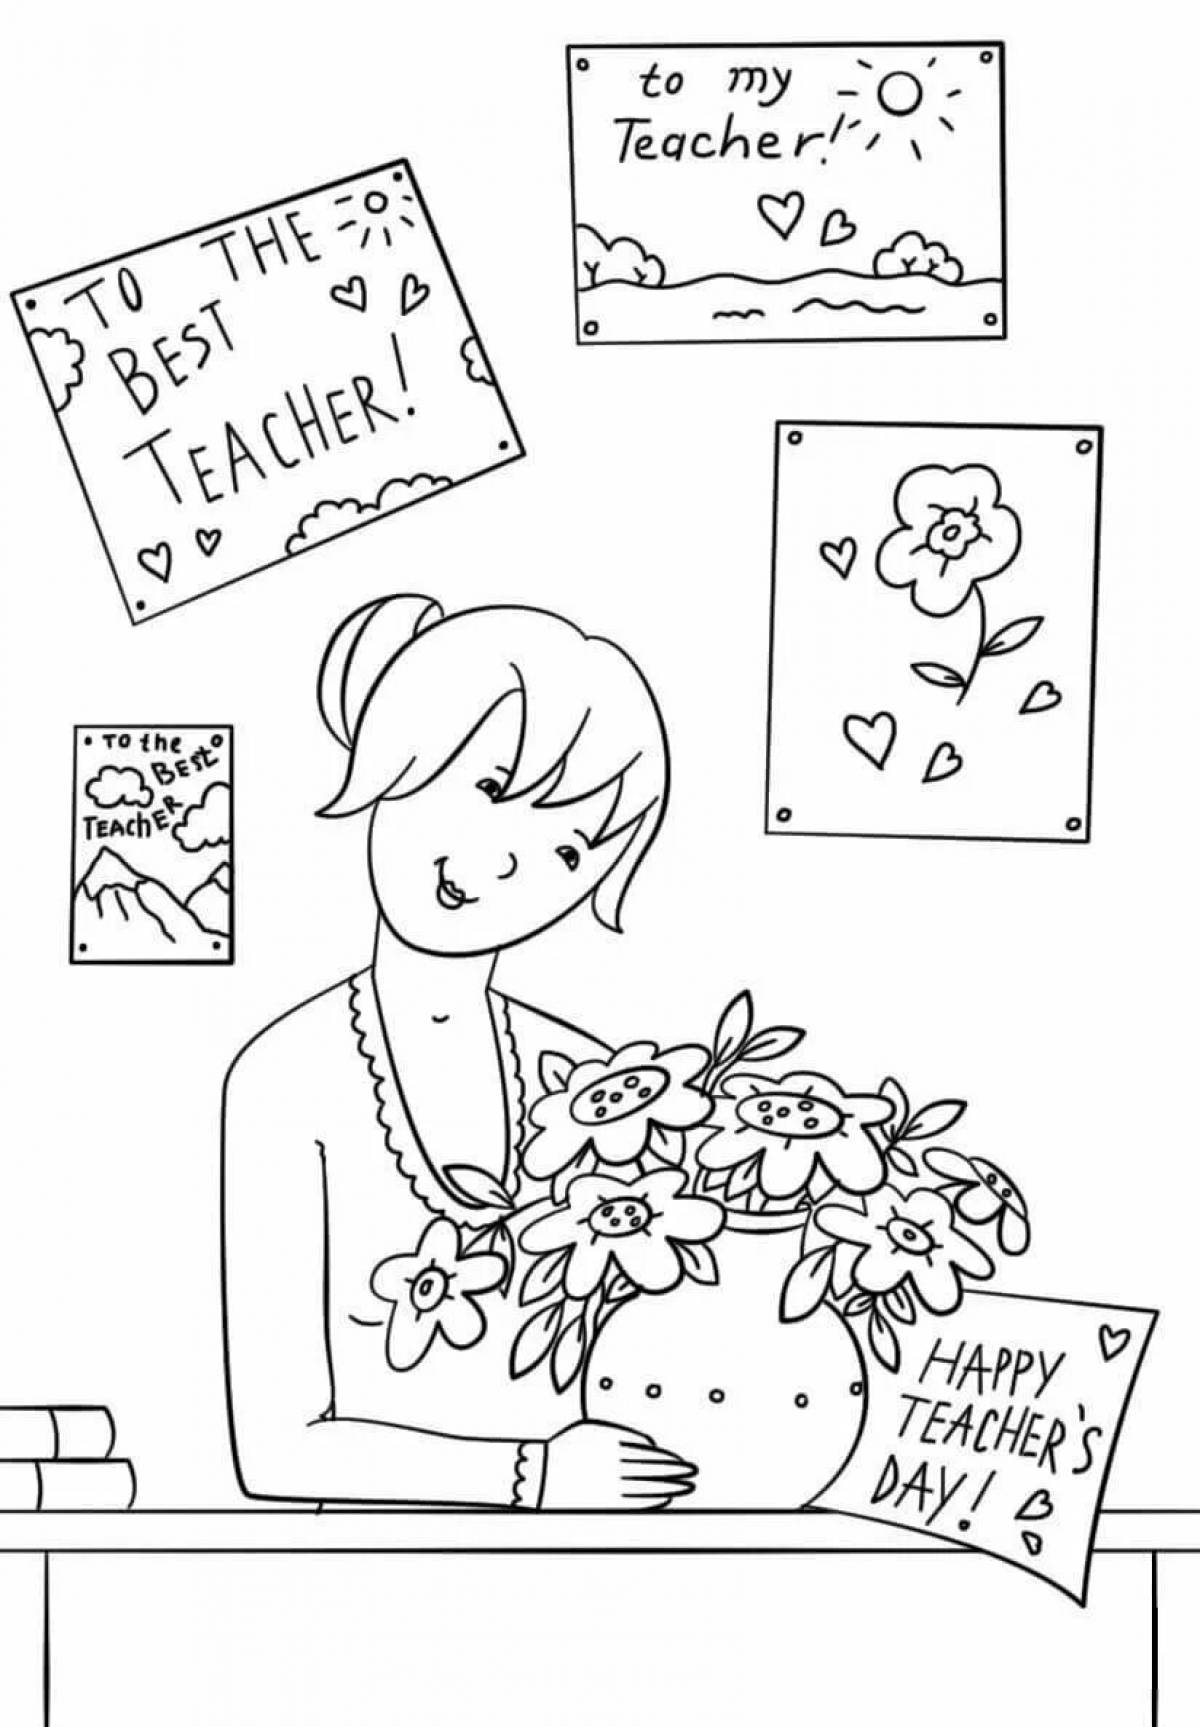 Favorite Teacher Inspirational Coloring Page